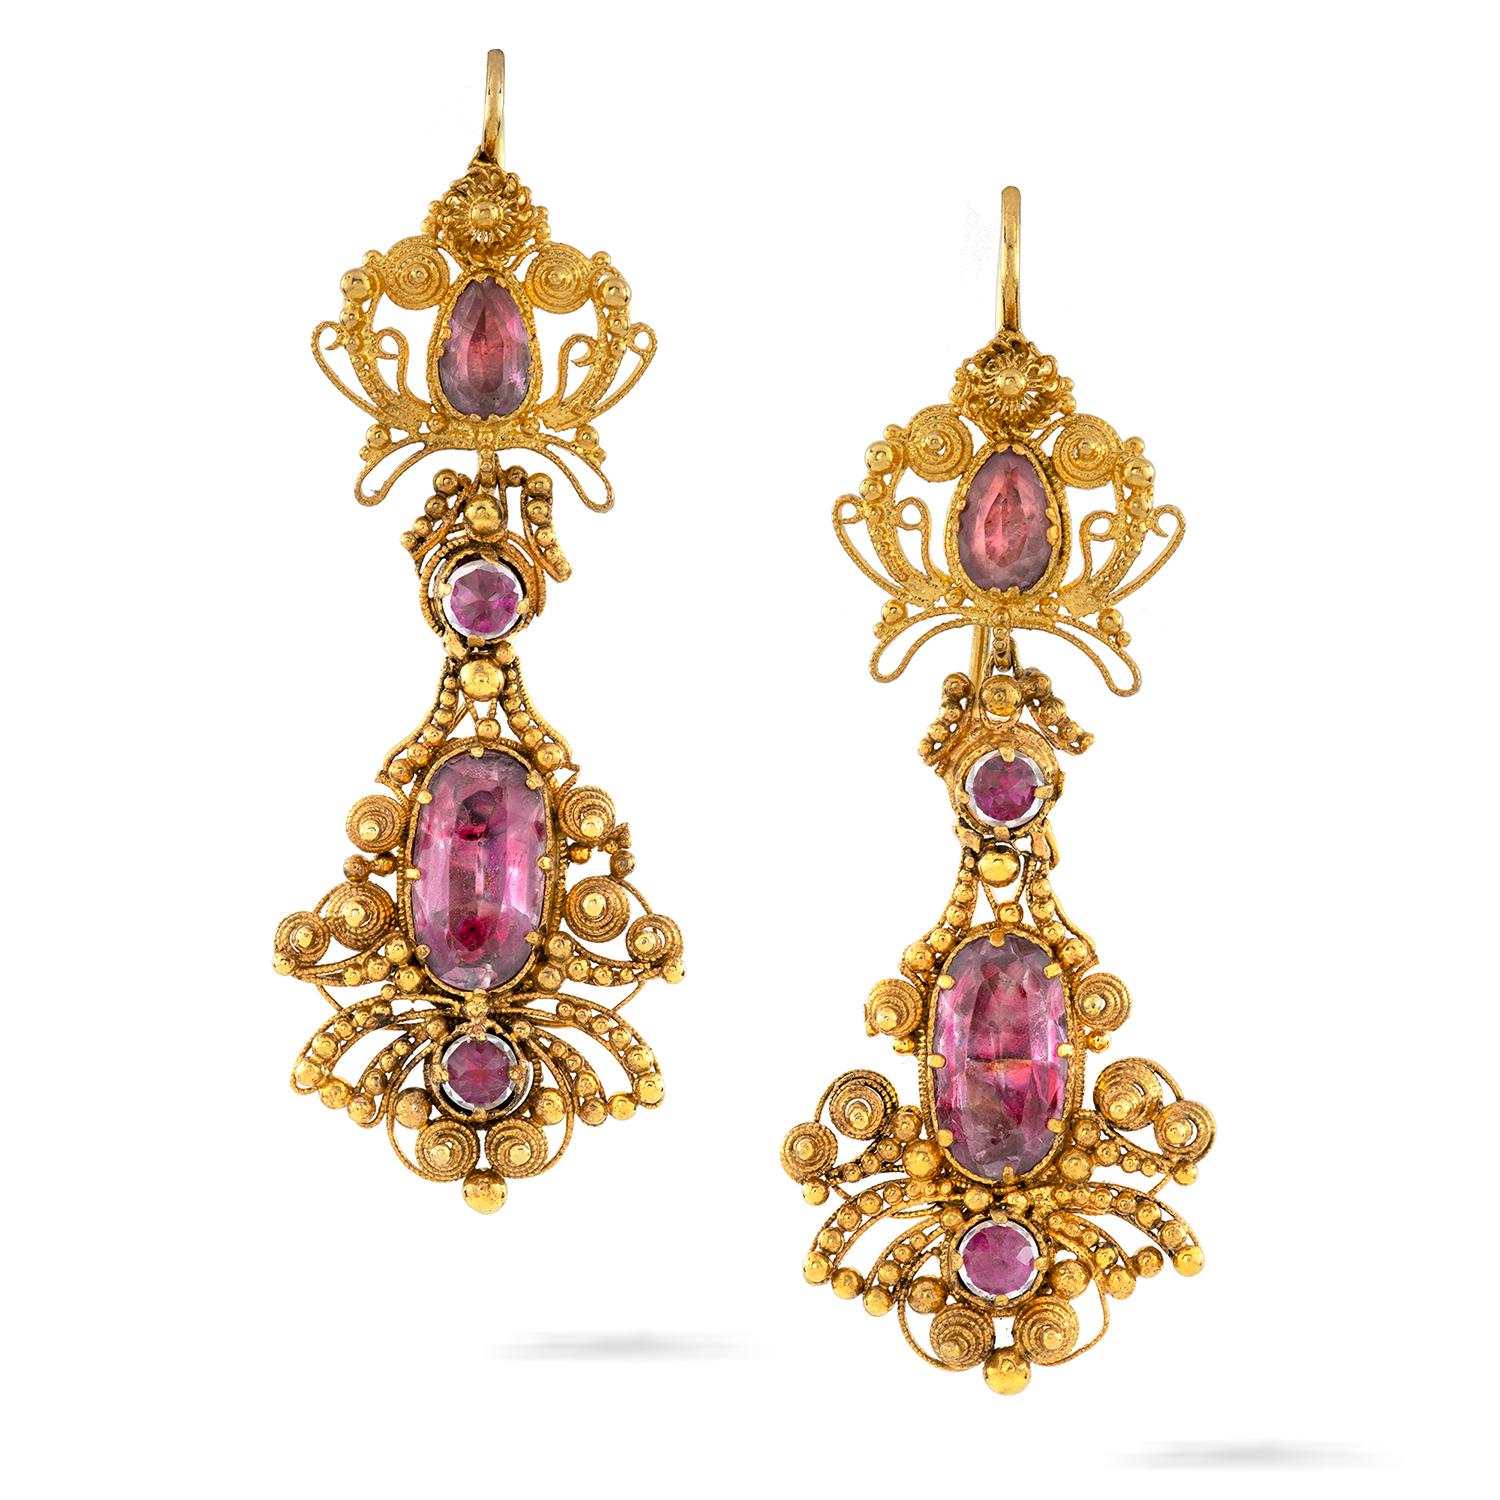 A Georgian pink topaz and gold cannetille suite, the necklace consisting of five graduating from the centre oval-cut pink topaz-set gold links, from the central suspended three pear-shaped topaz-set drops, the links joined together by six oval-cut